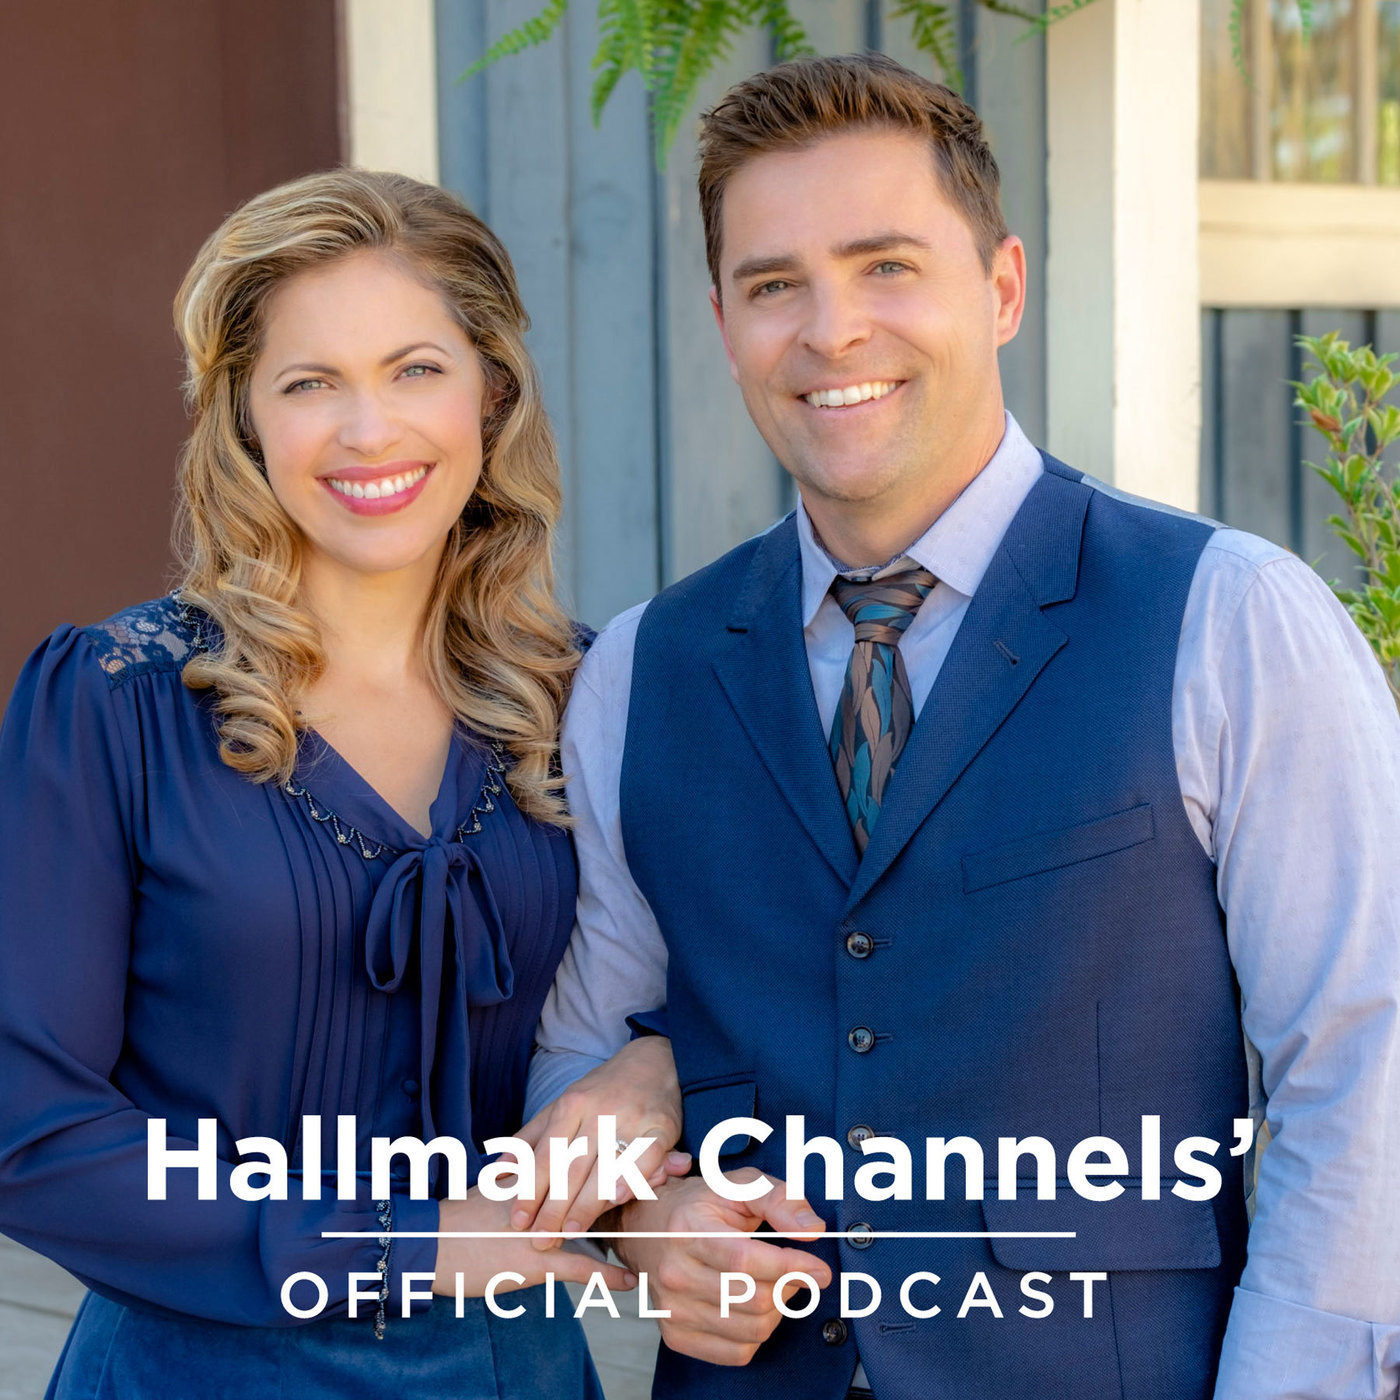 When Calls the Heart S:6 - Phone Rings and Heart Strings E:1 Recap - Hallmark Channels' Official Podcast